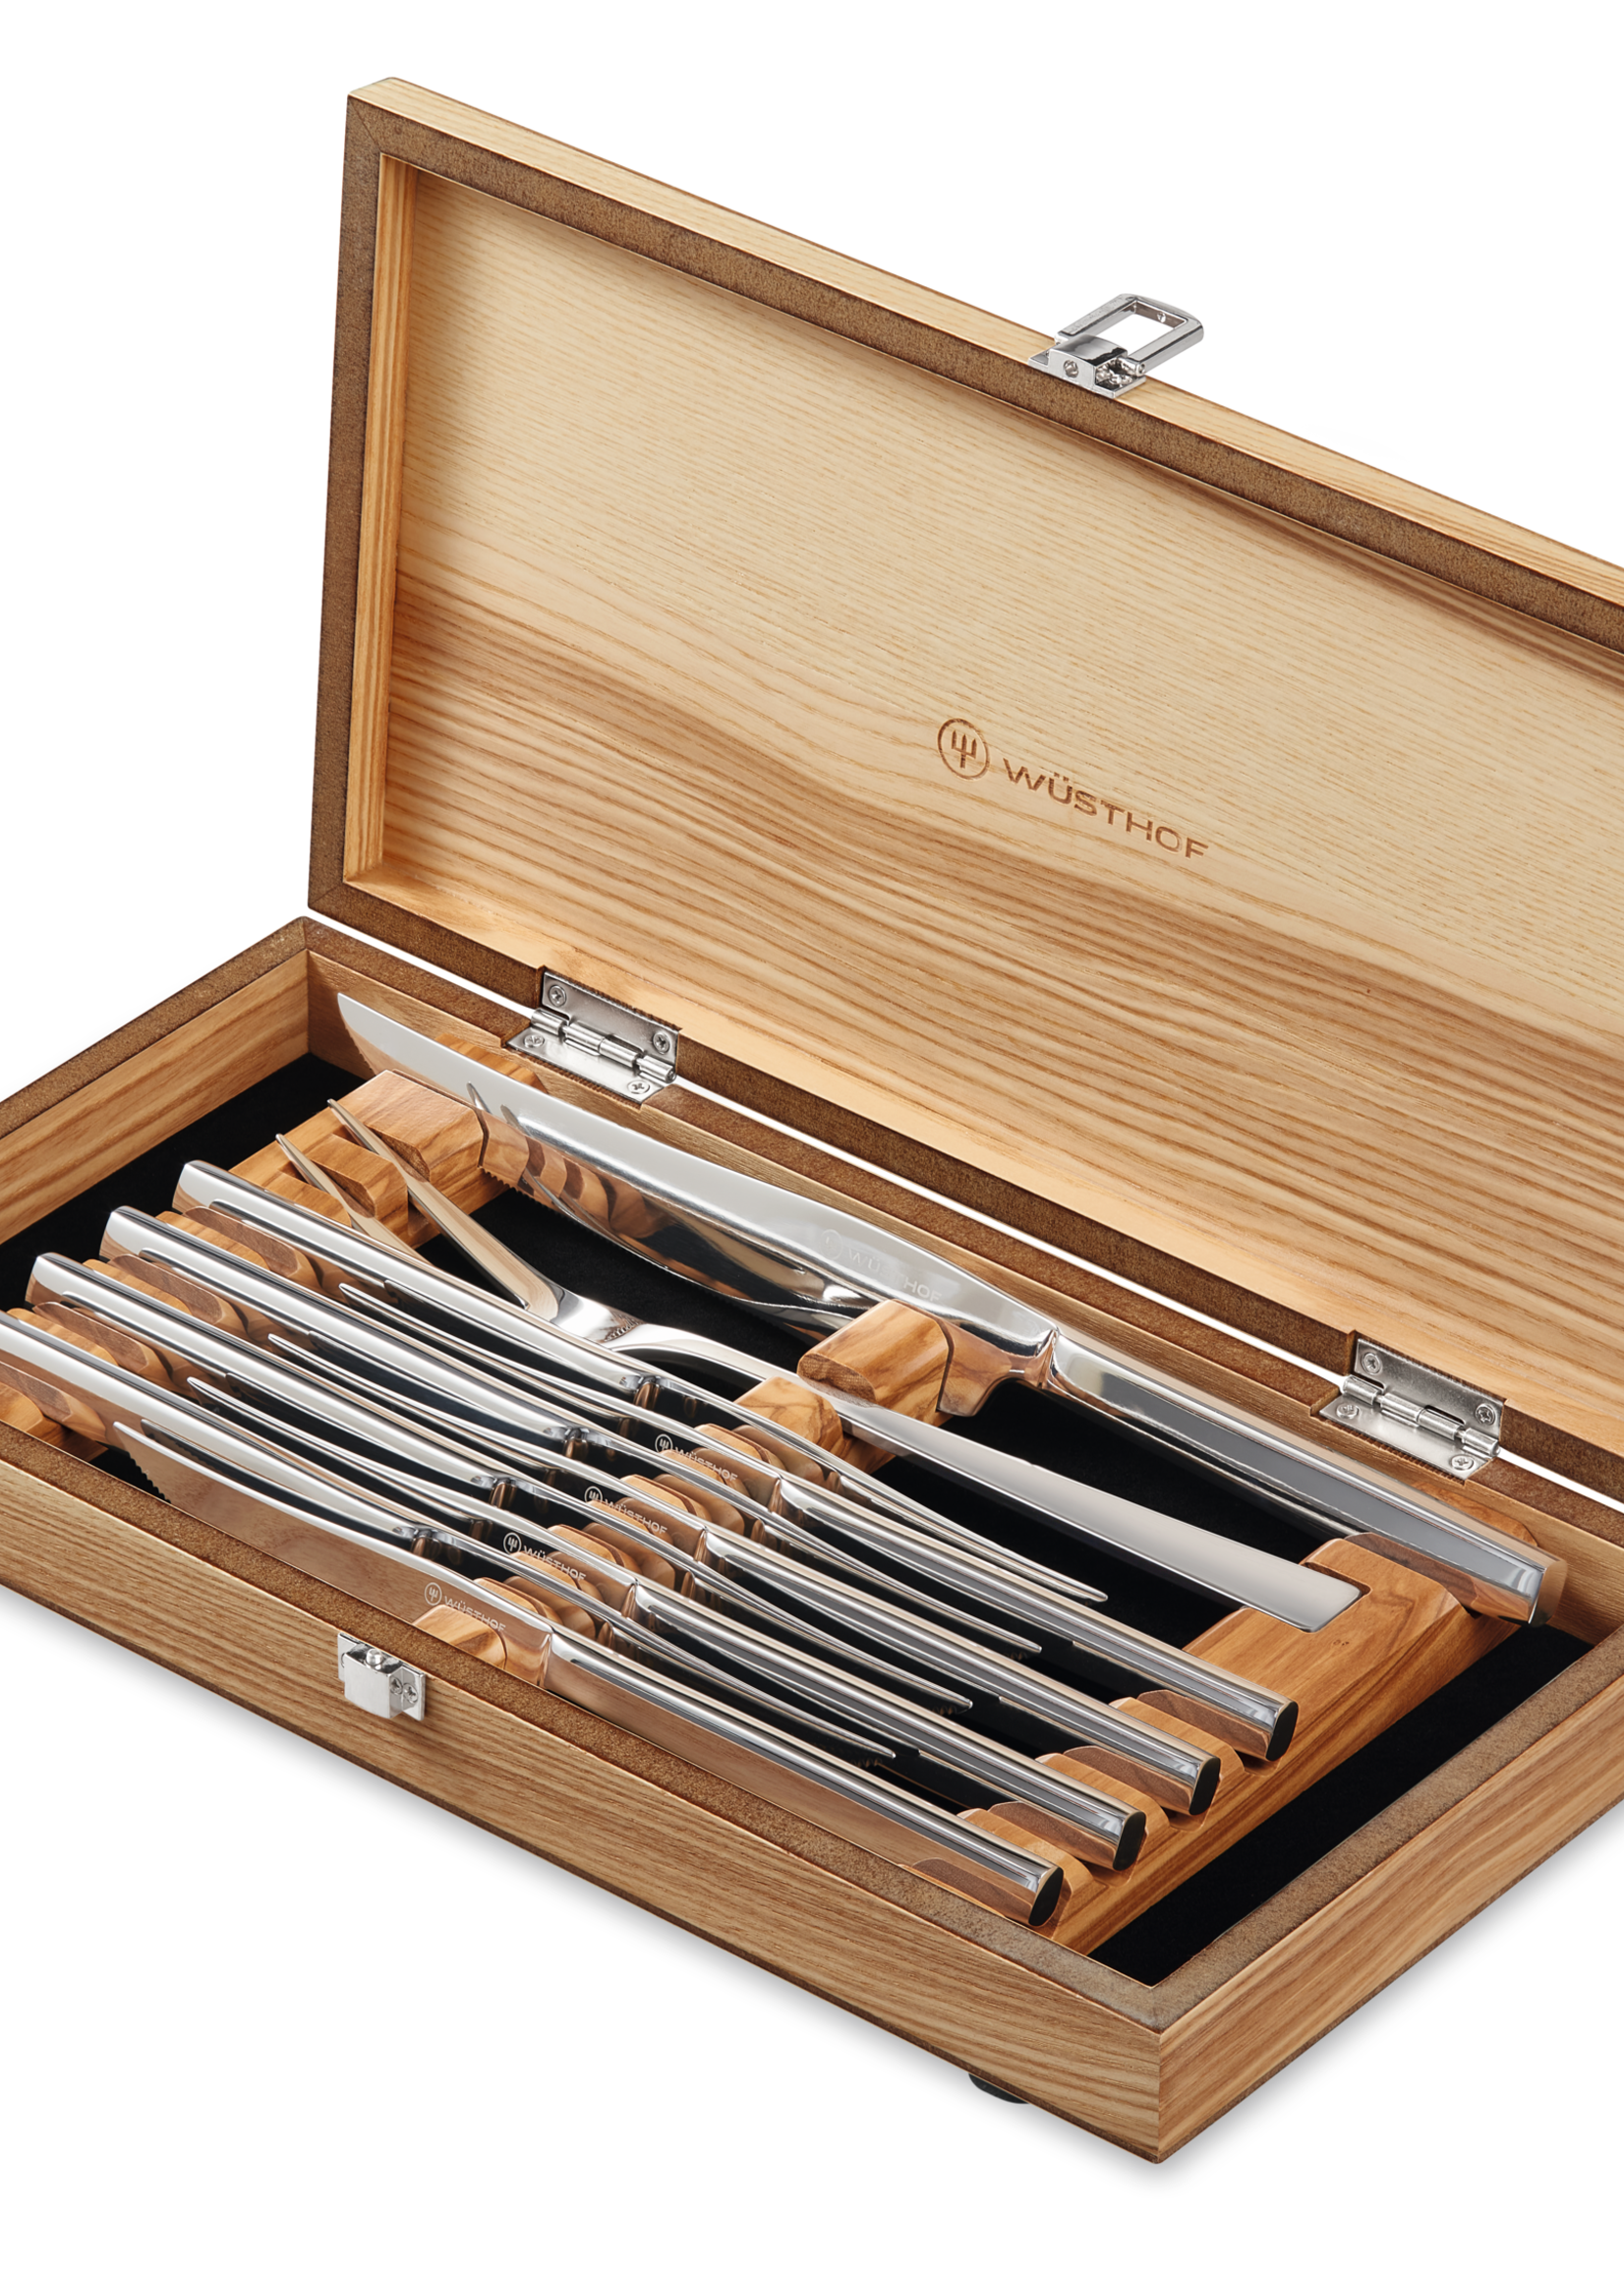 Wusthof 10pc Stainless Steak Knife & Carving Set, Olivewood Chest